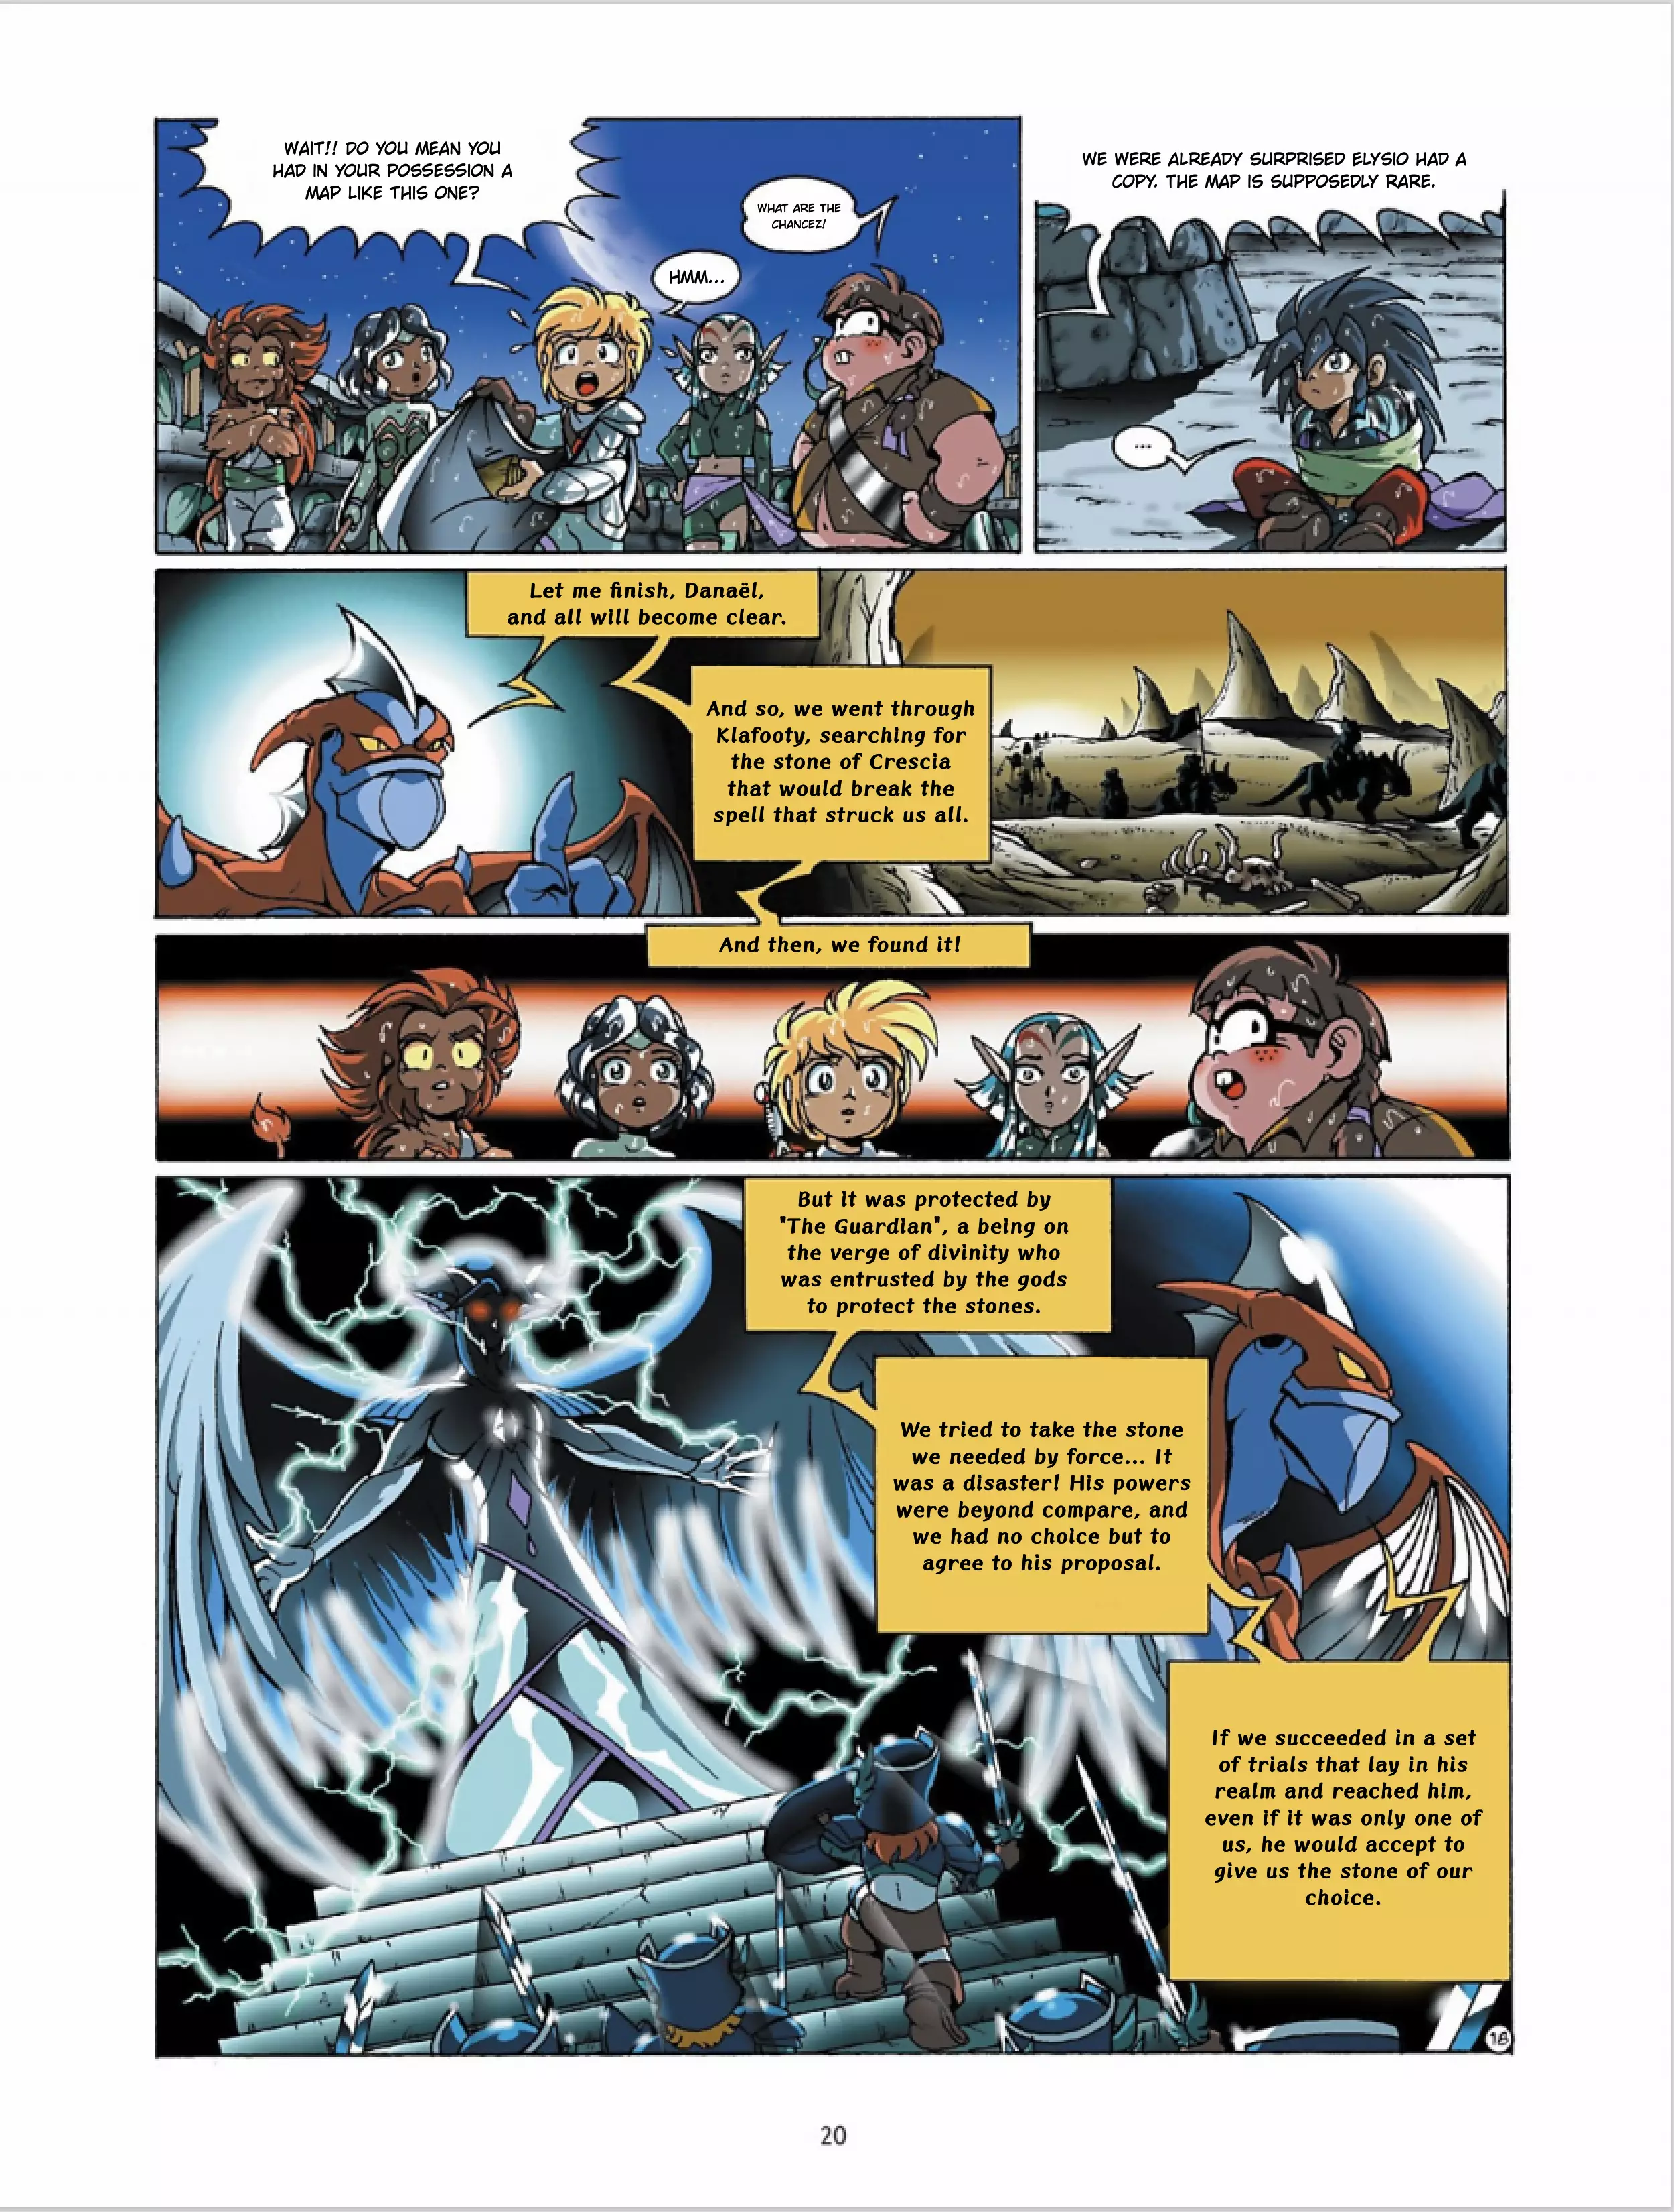 The Legendaries - 2 page 20-74a33363